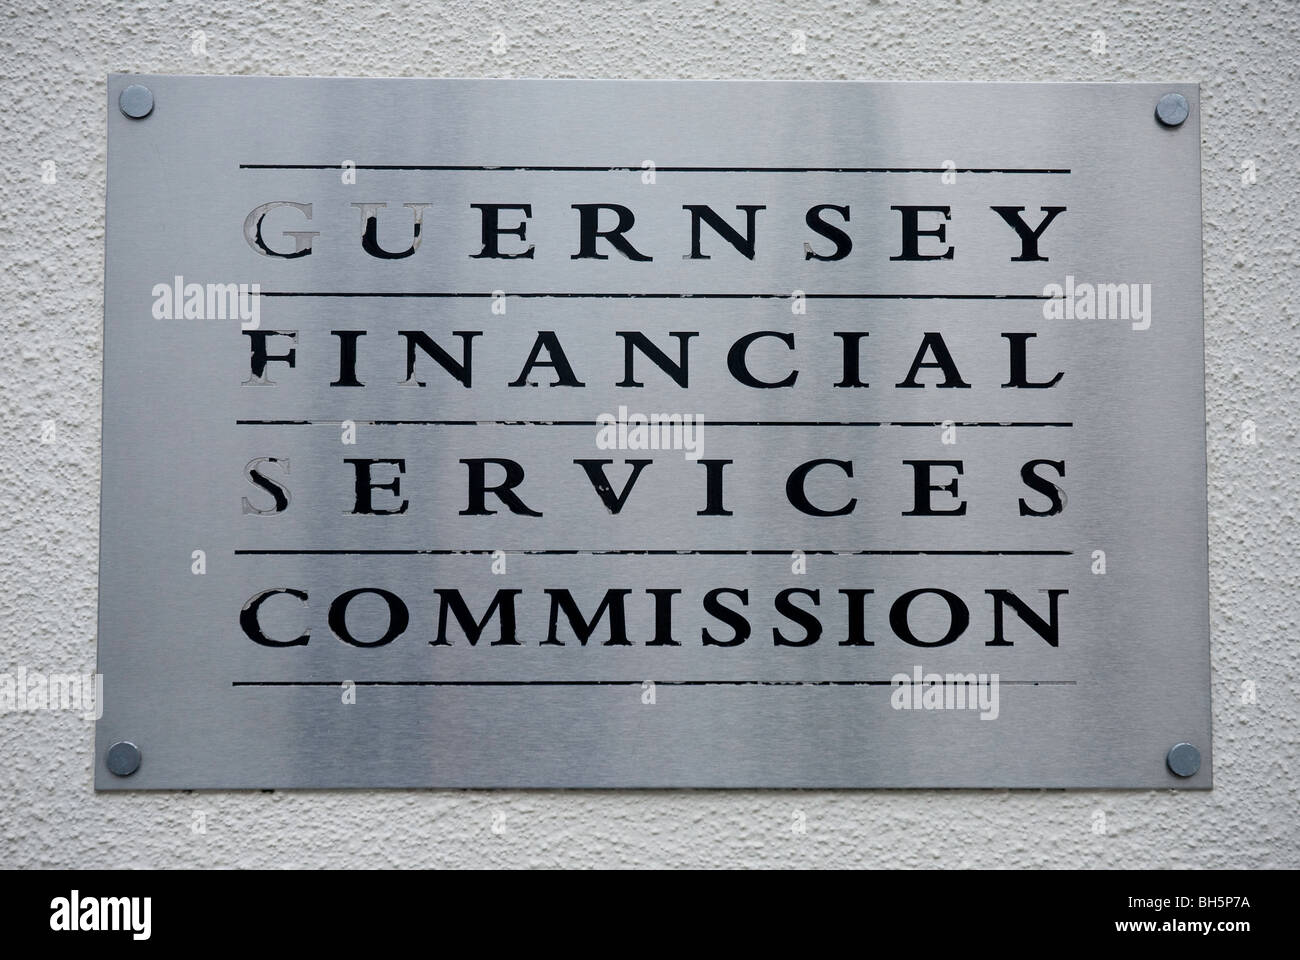 Guernsey Financial Services Commission sign Banque D'Images